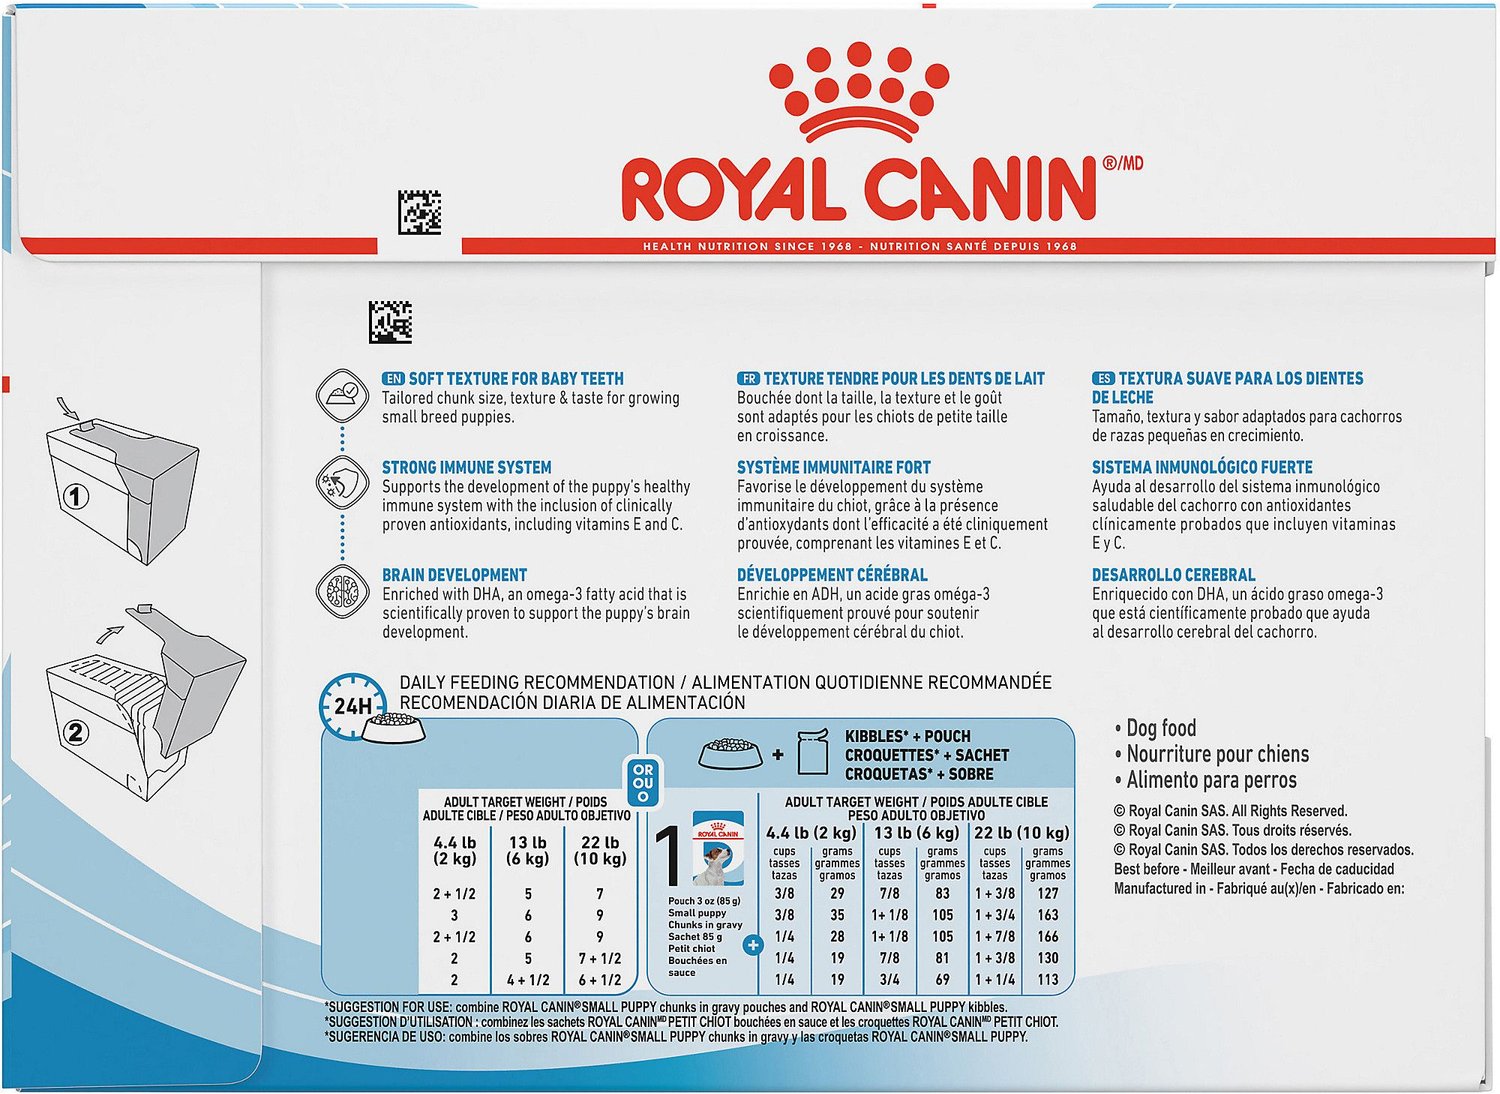 ROYAL CANIN Small Puppy Wet Dog Food, 3-oz pouch, case of 12 - Chewy.com